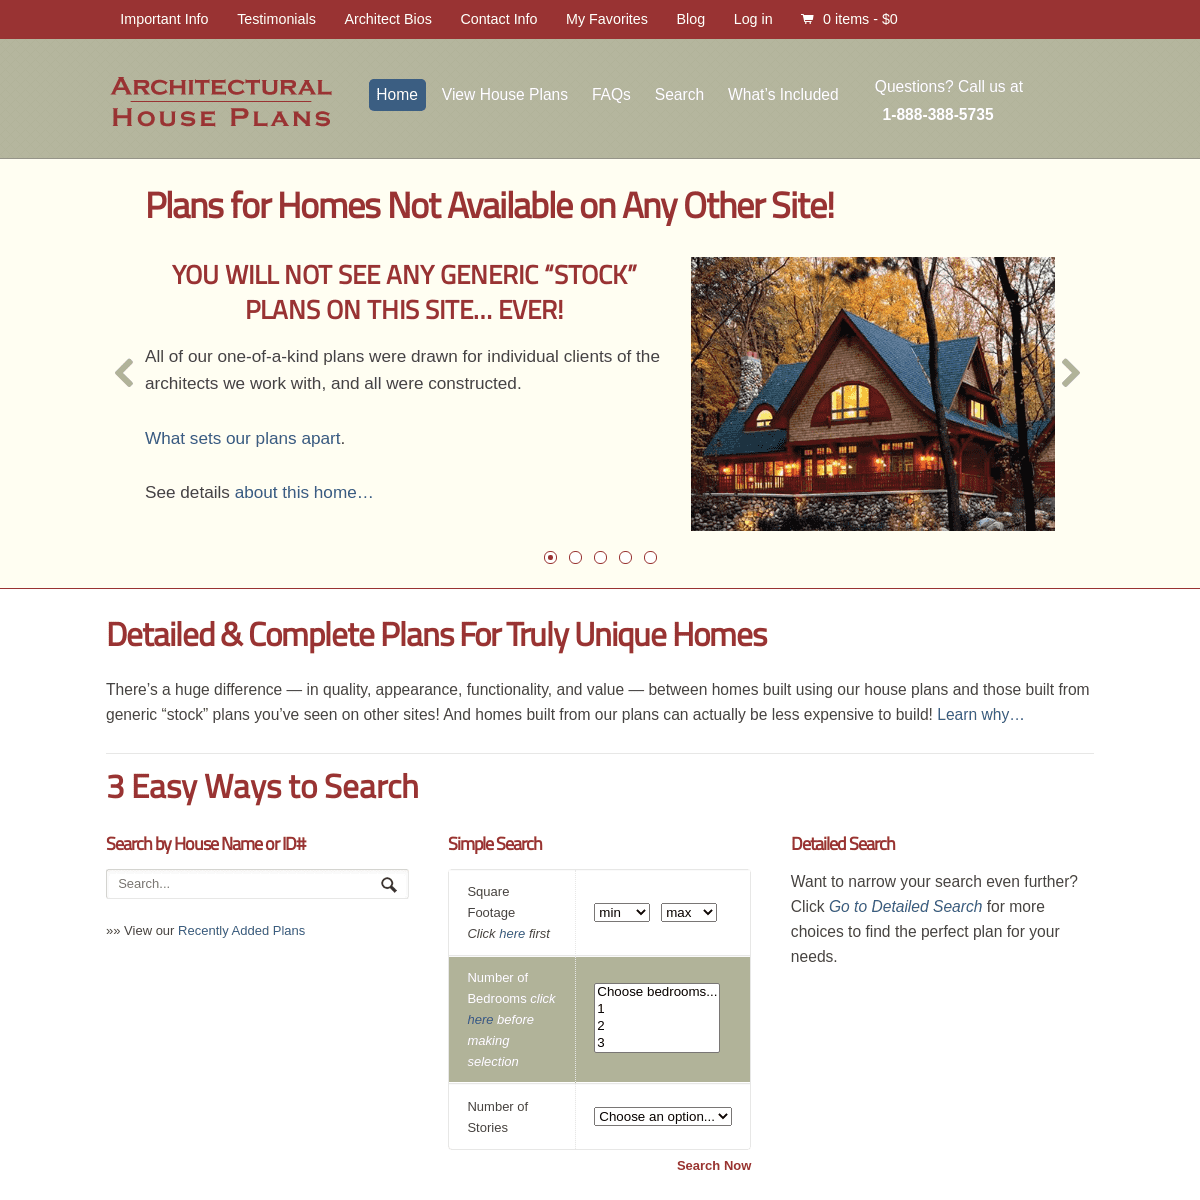 A complete backup of https://architecturalhouseplans.com